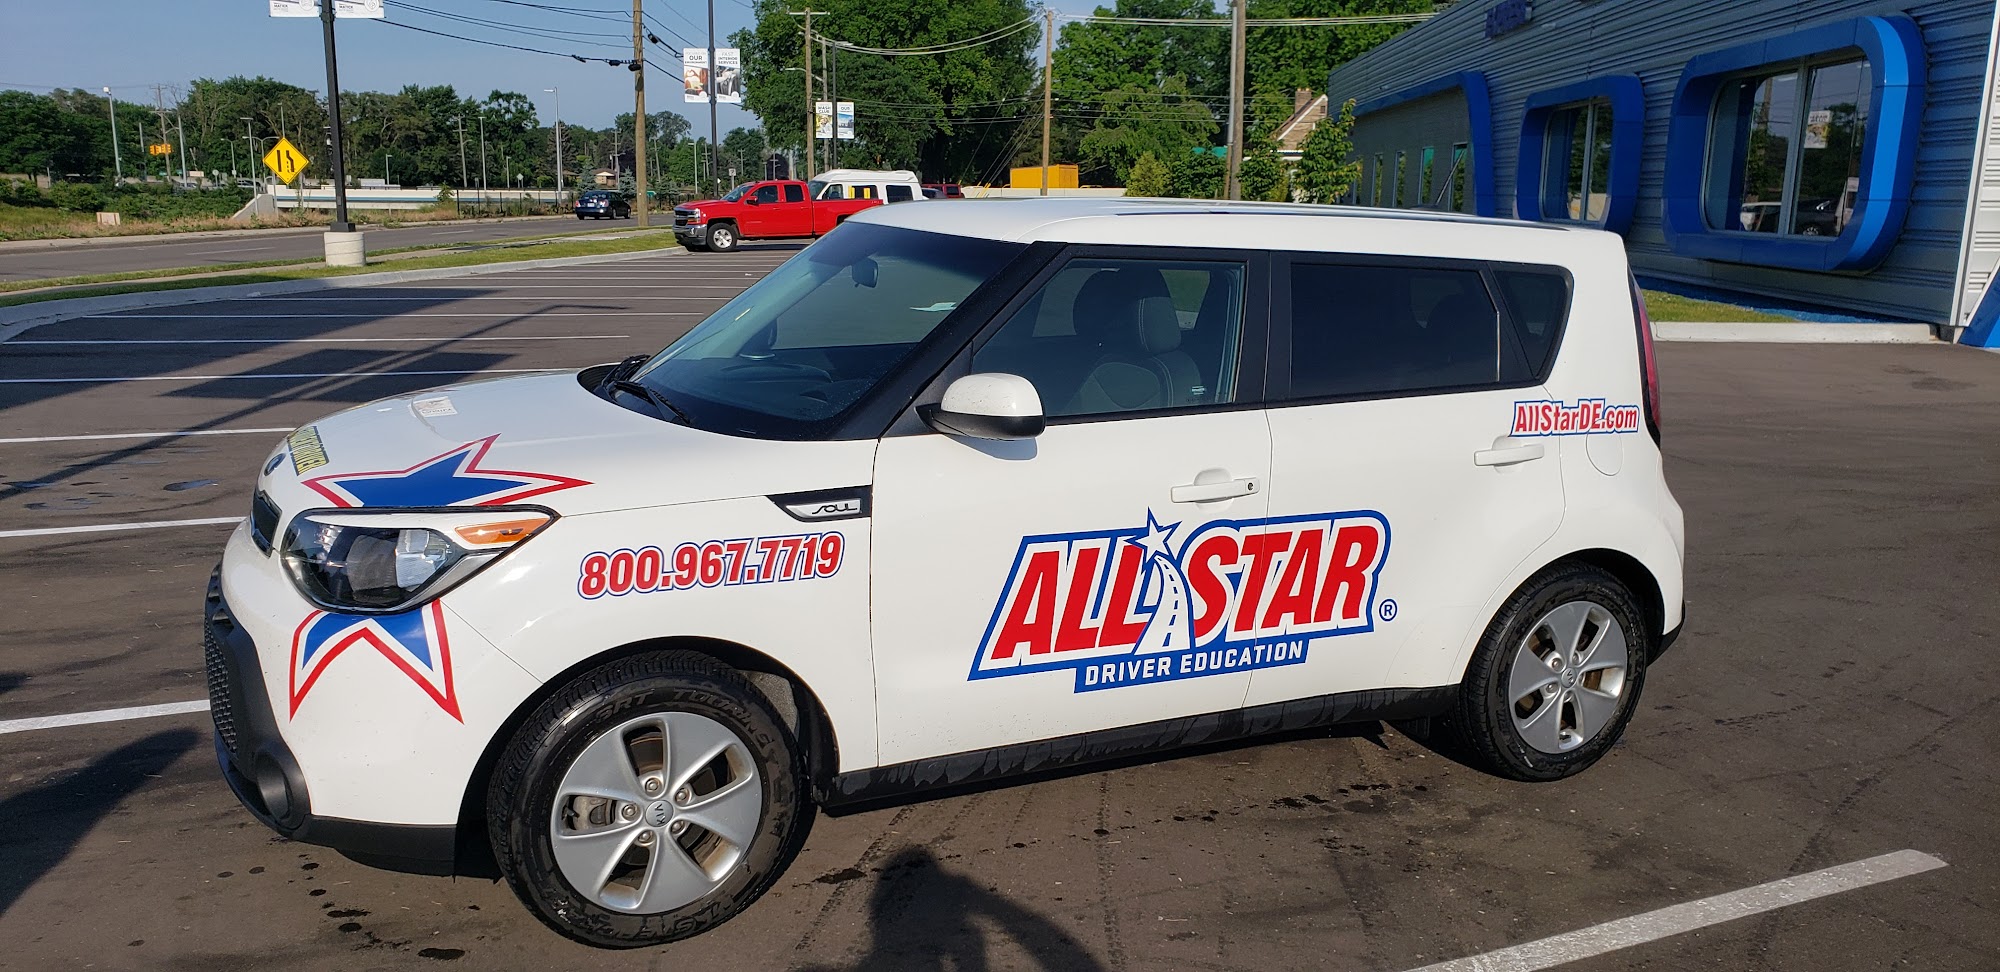 All Star Driver Education - Corporate Office